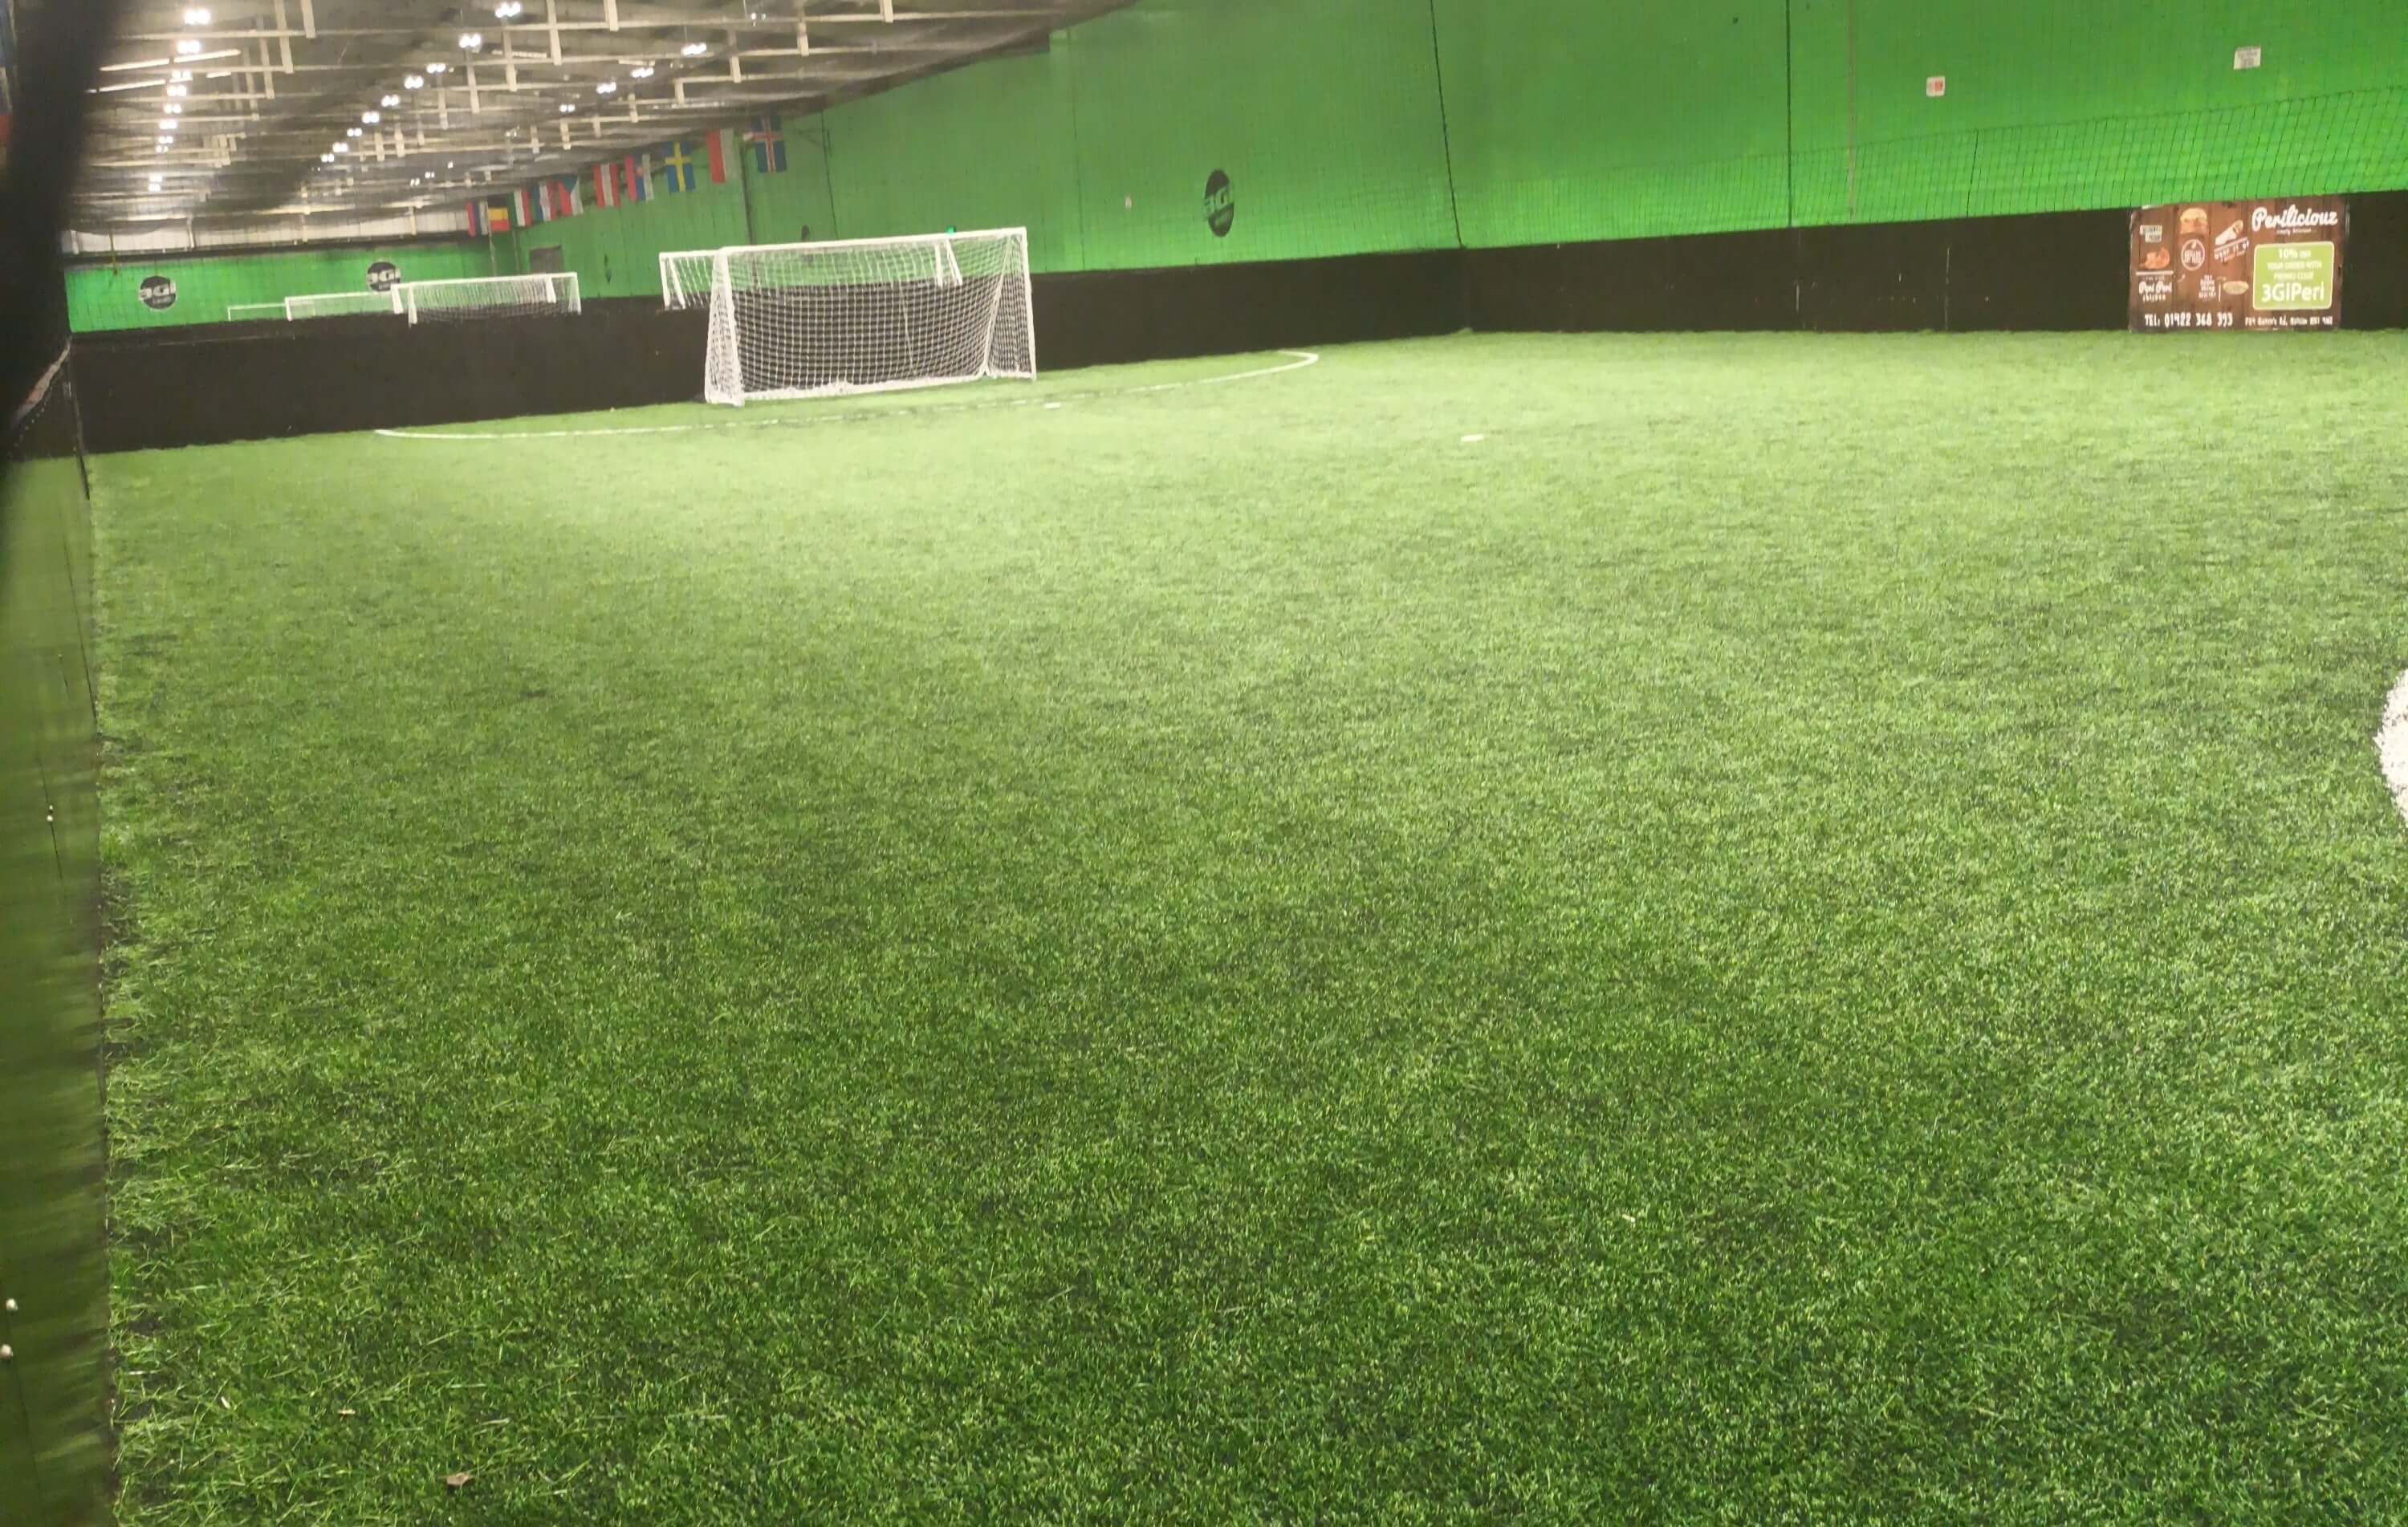 An indoor five-a-side football pitch.